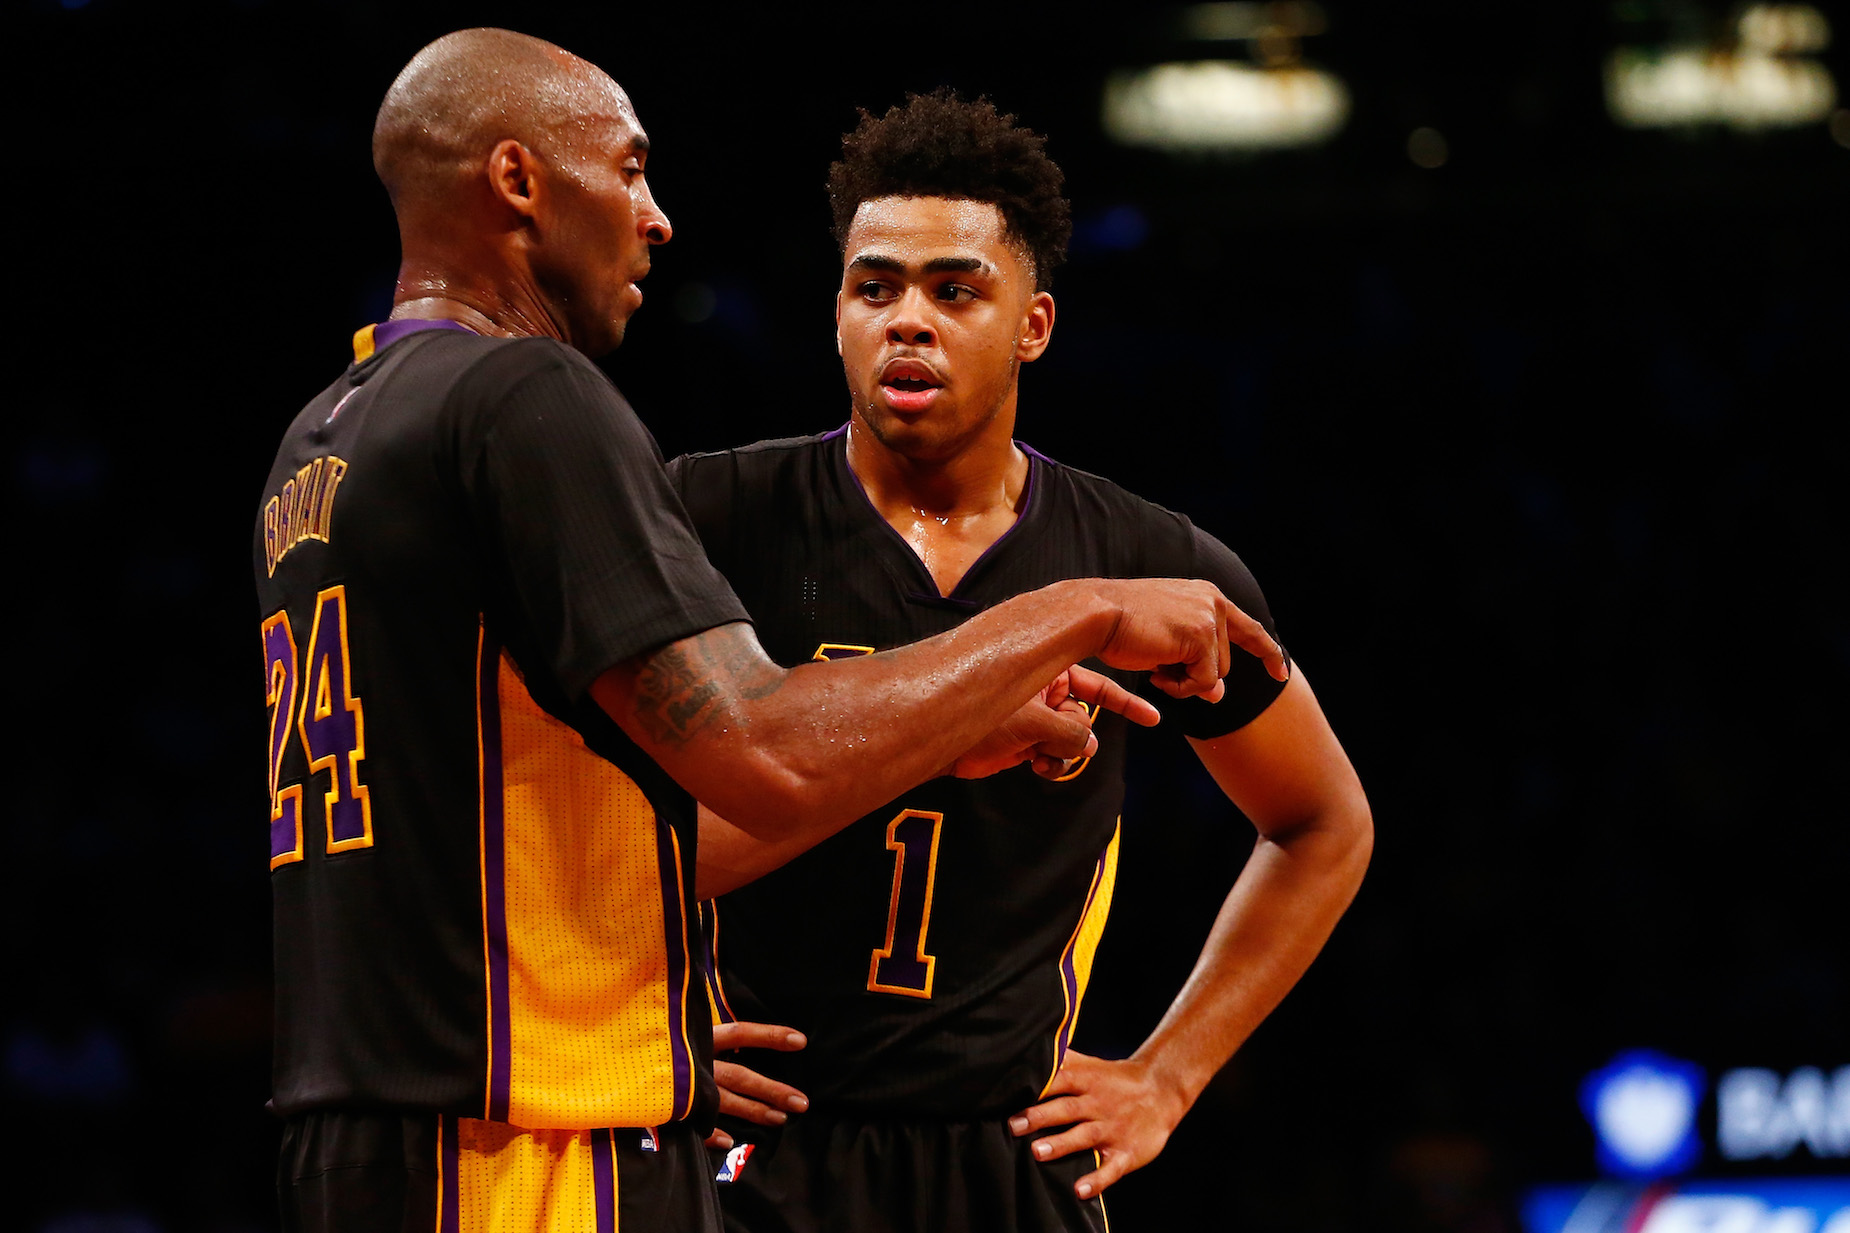 Early in his NBA career, D'Angelo Russell learned an invaluable lesson from Kobe Bryant and Damian Lillard.